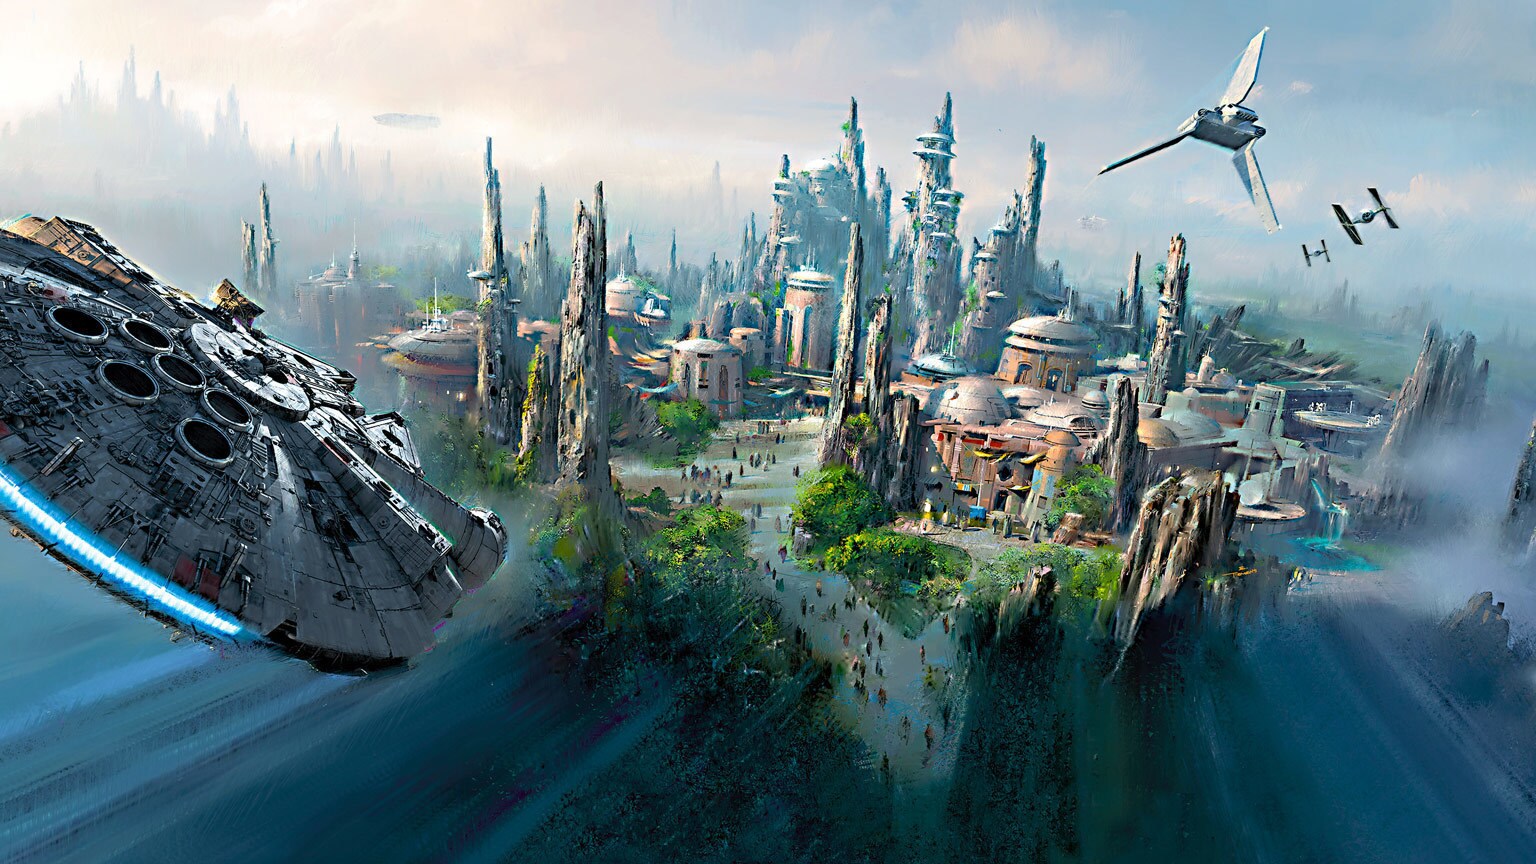 Bright Suns: Inside The Art of Star Wars: Galaxy’s Edge - Exclusive Preview